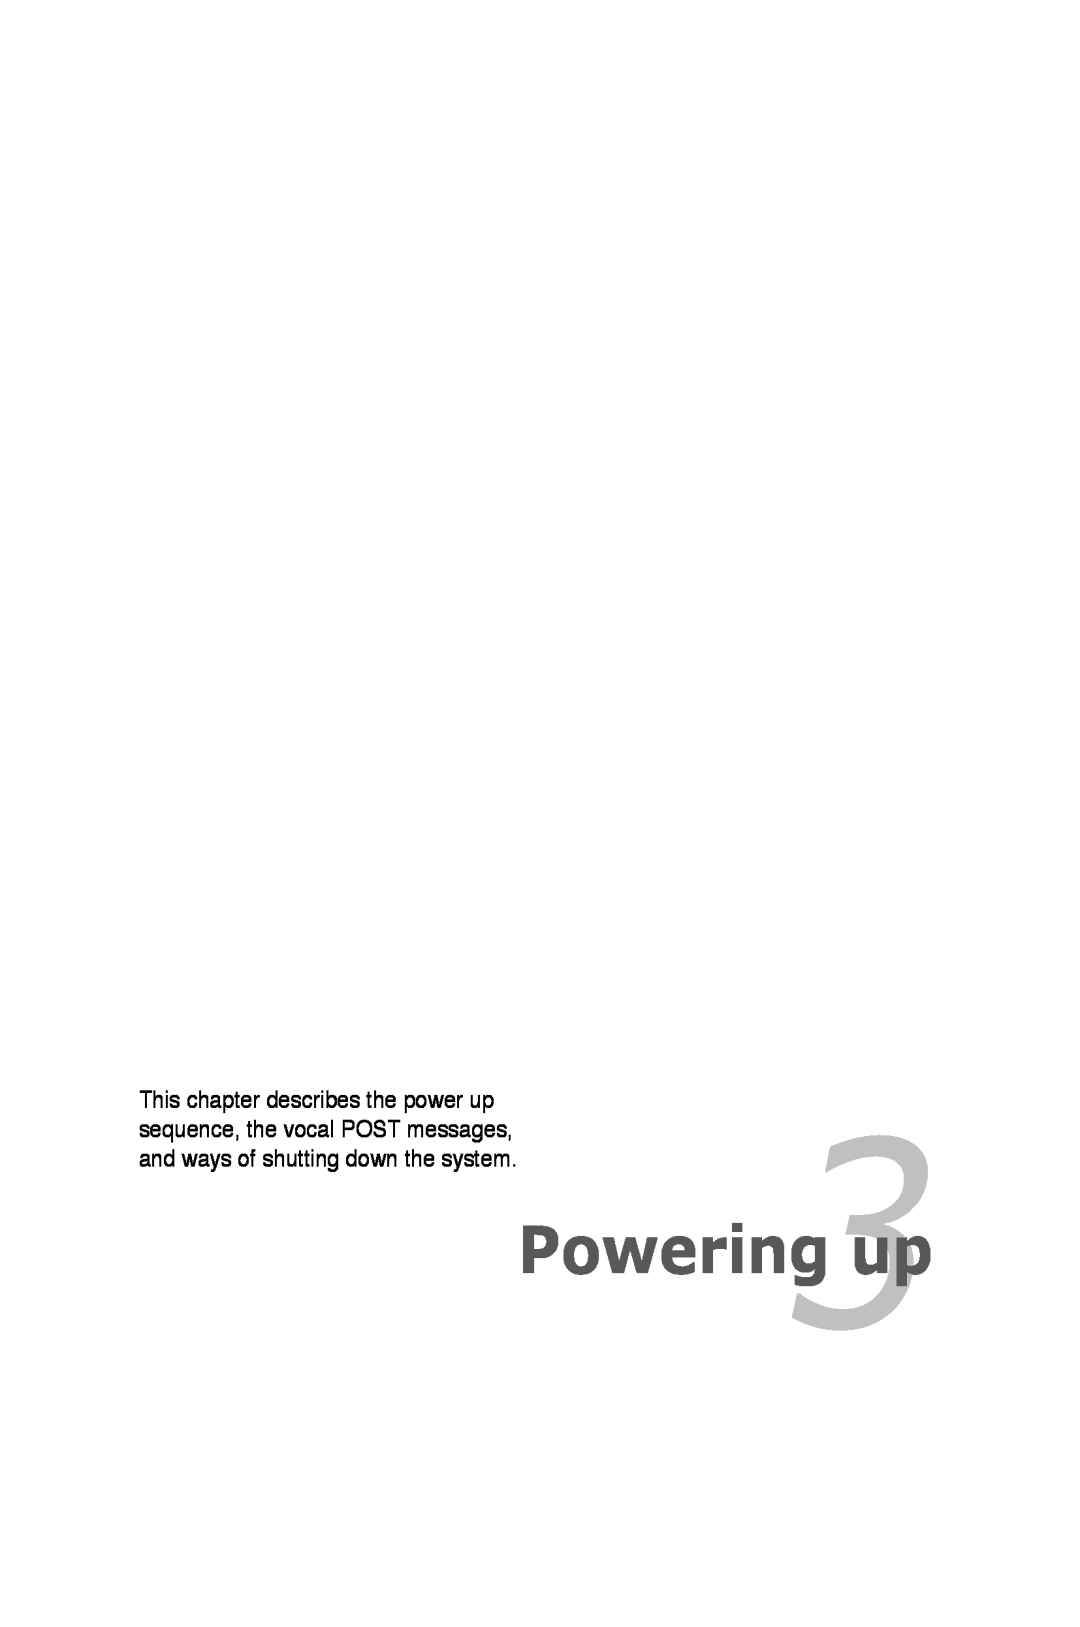 Asus P5K/EPU manual Powering up, and ways of shutting down the system 